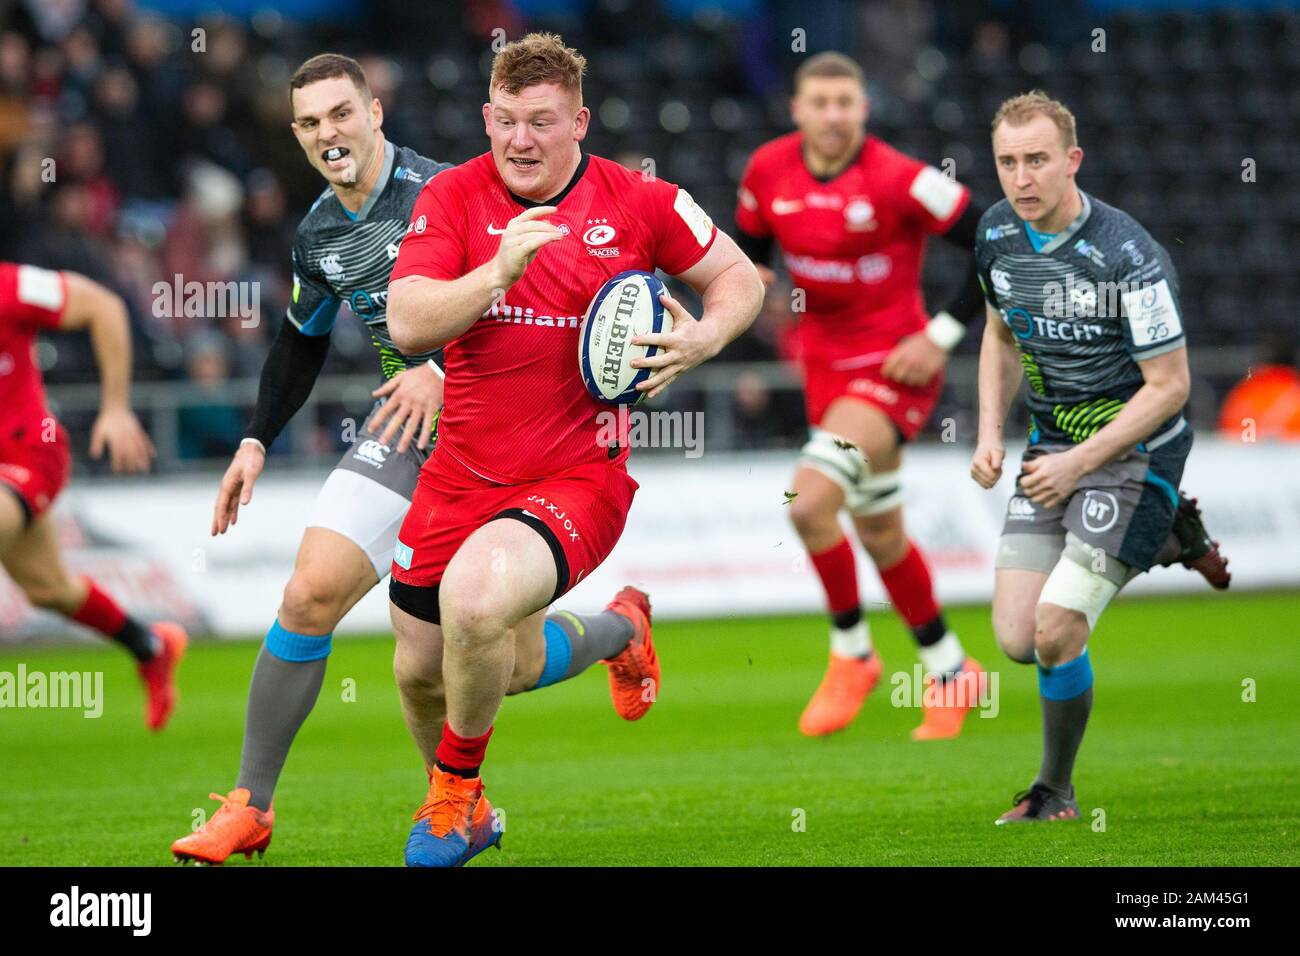 Swansea, UK. 11th Jan, 2020. Saracens prop Rhys Carre on the attack in the Ospreys v Saracens Heineken Champions Cup Rugby Match. Credit: Gruffydd Ll. Thomas/Alamy Live News Stock Photo